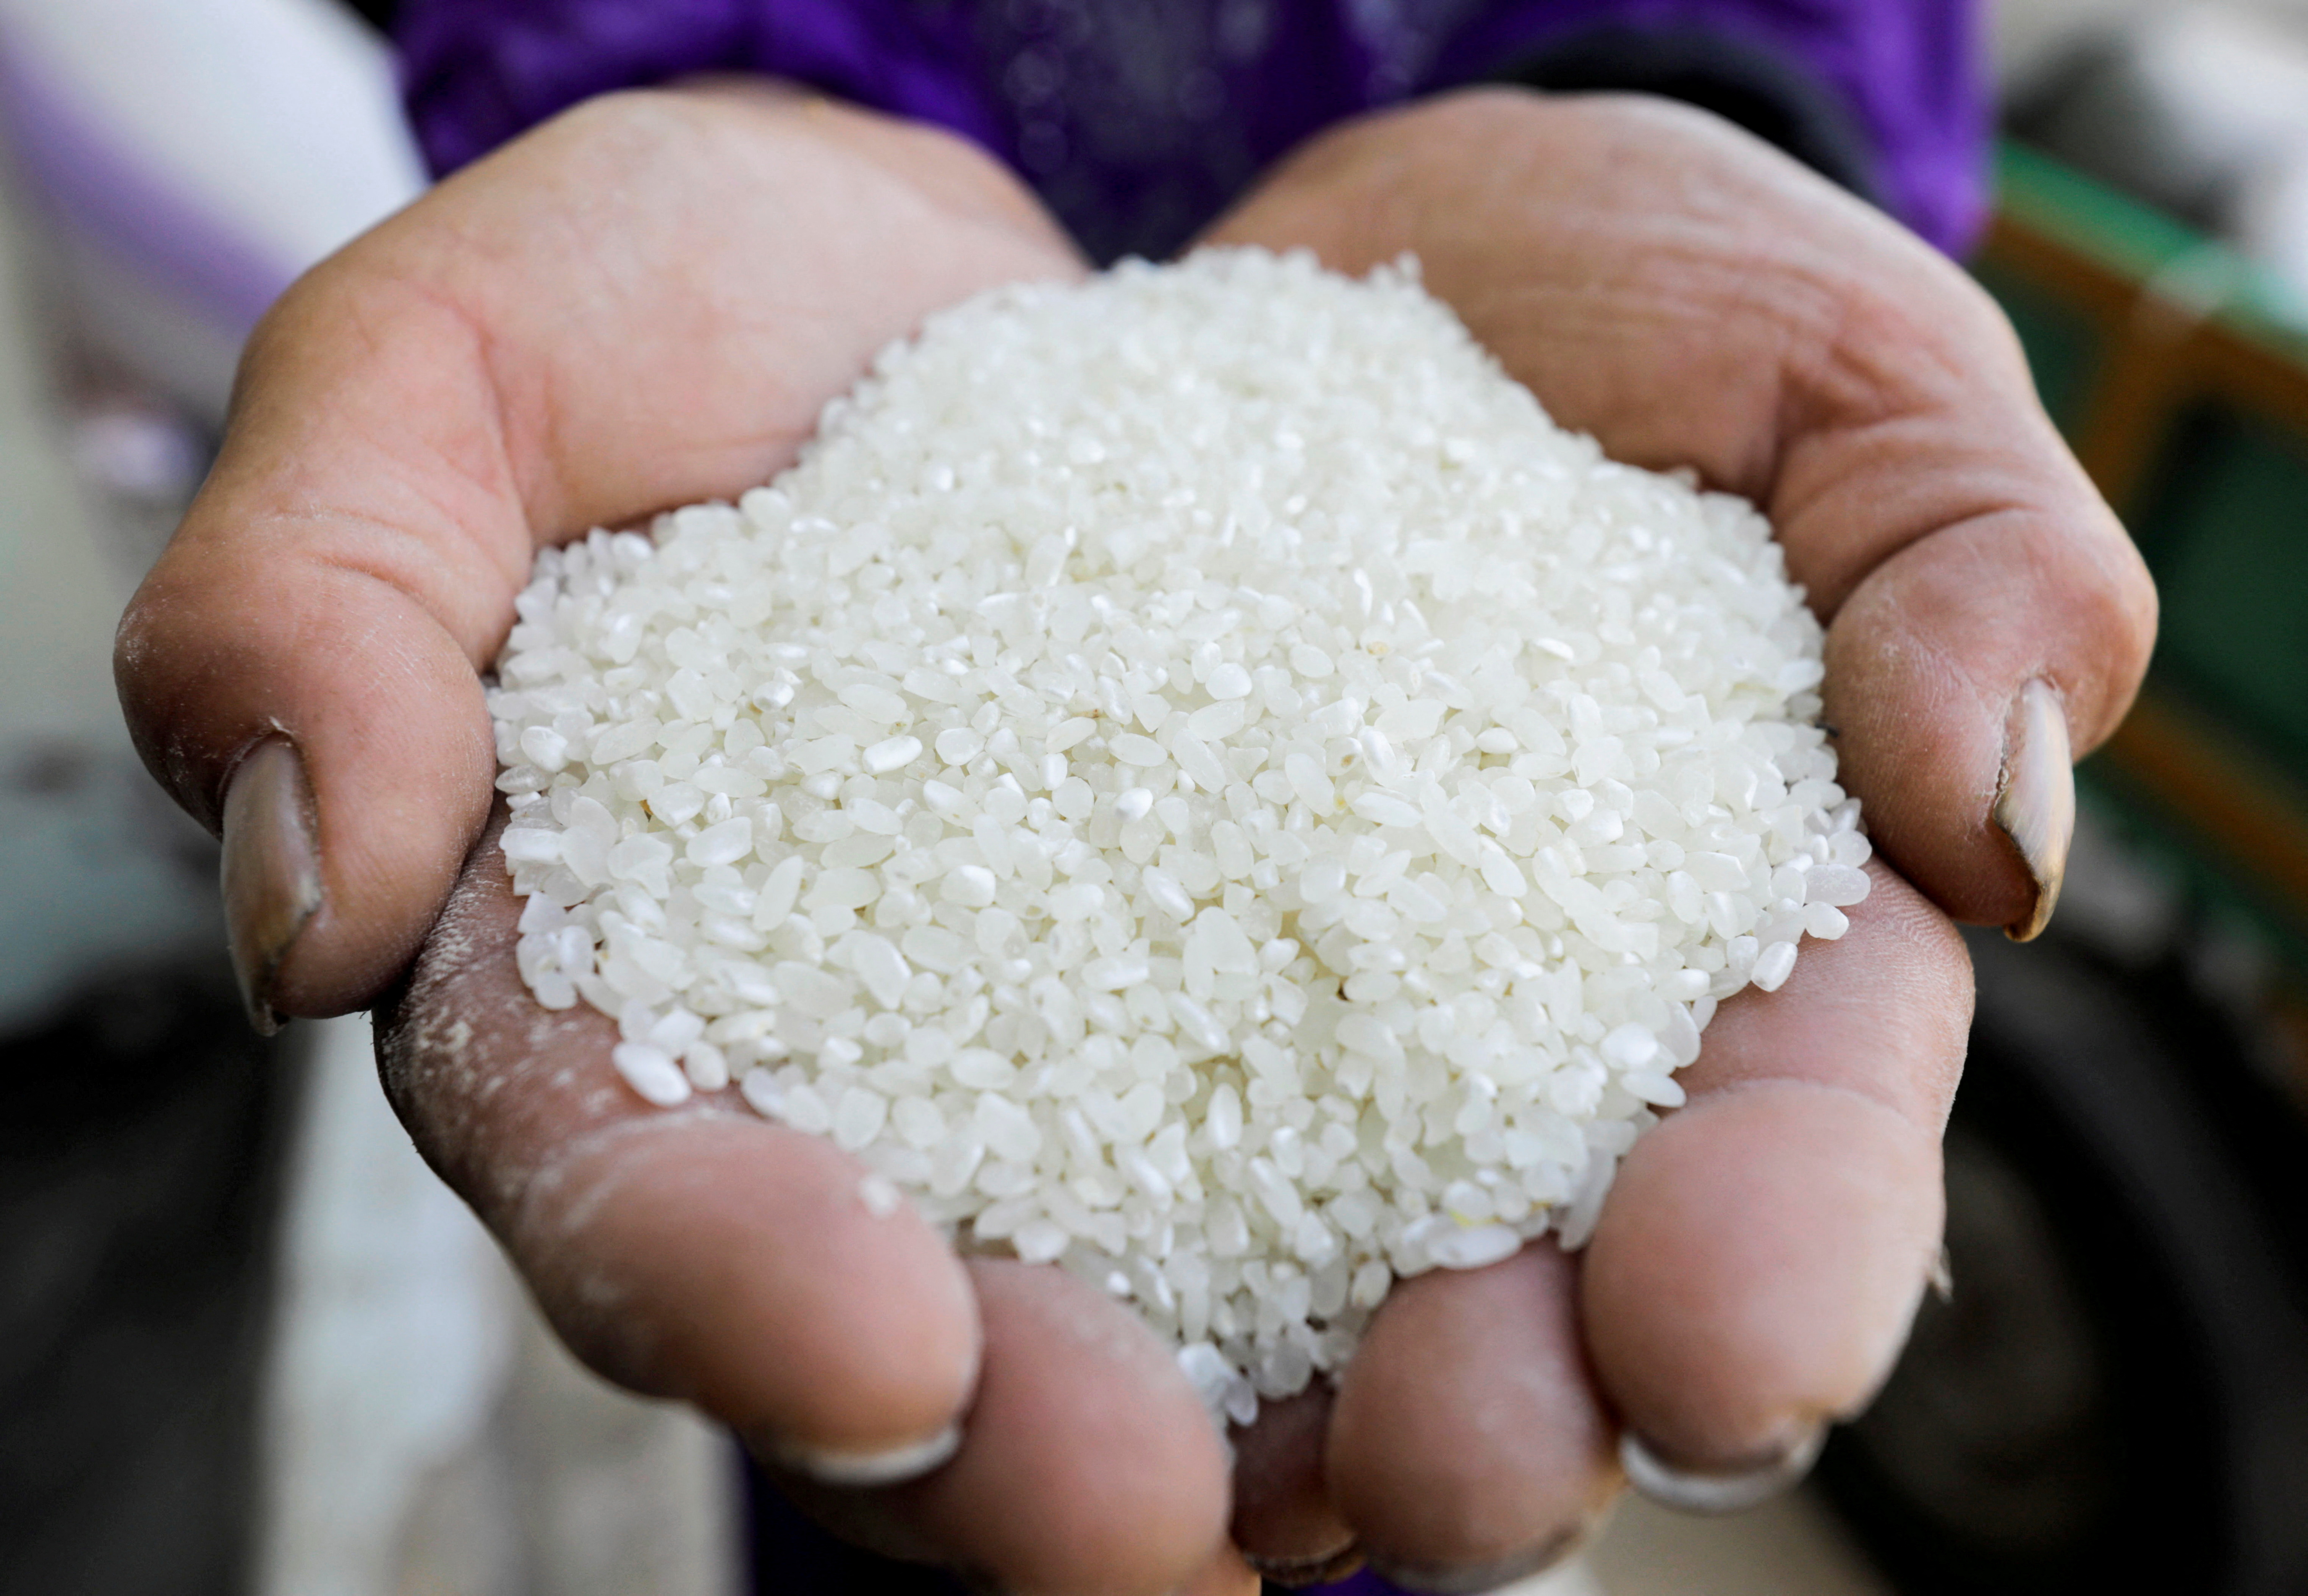 Analysis: Strong Asian rice demand for animal feed sparks food supply  worries | Reuters